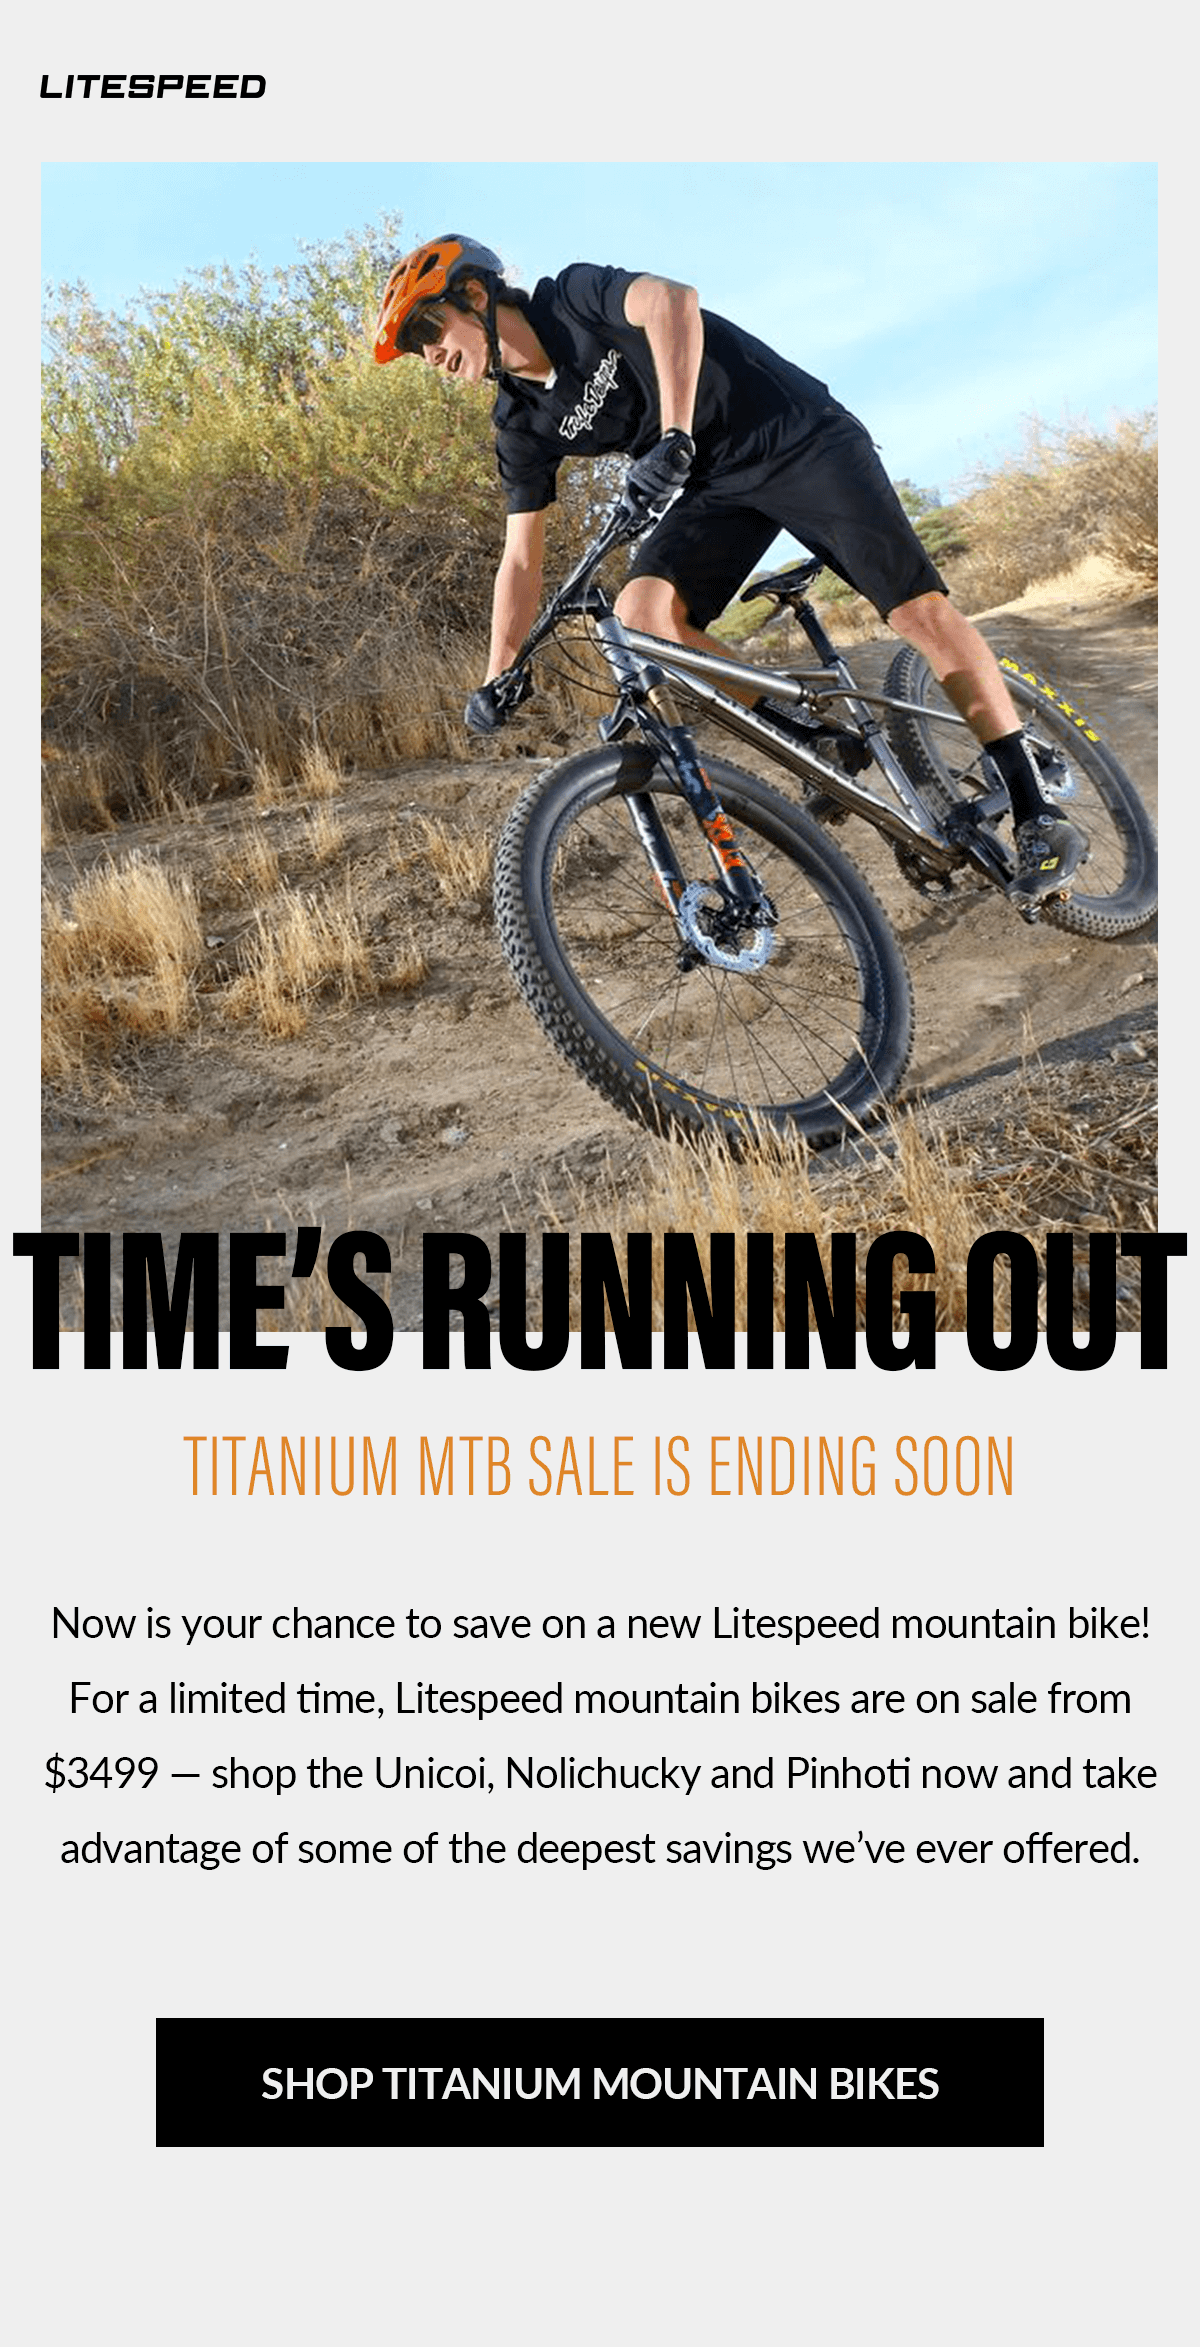 Send it into 2020: Litespeed MTB sale is here! Shop the Nolichucky, Unicoi and Pinhoti starting at $3499. 